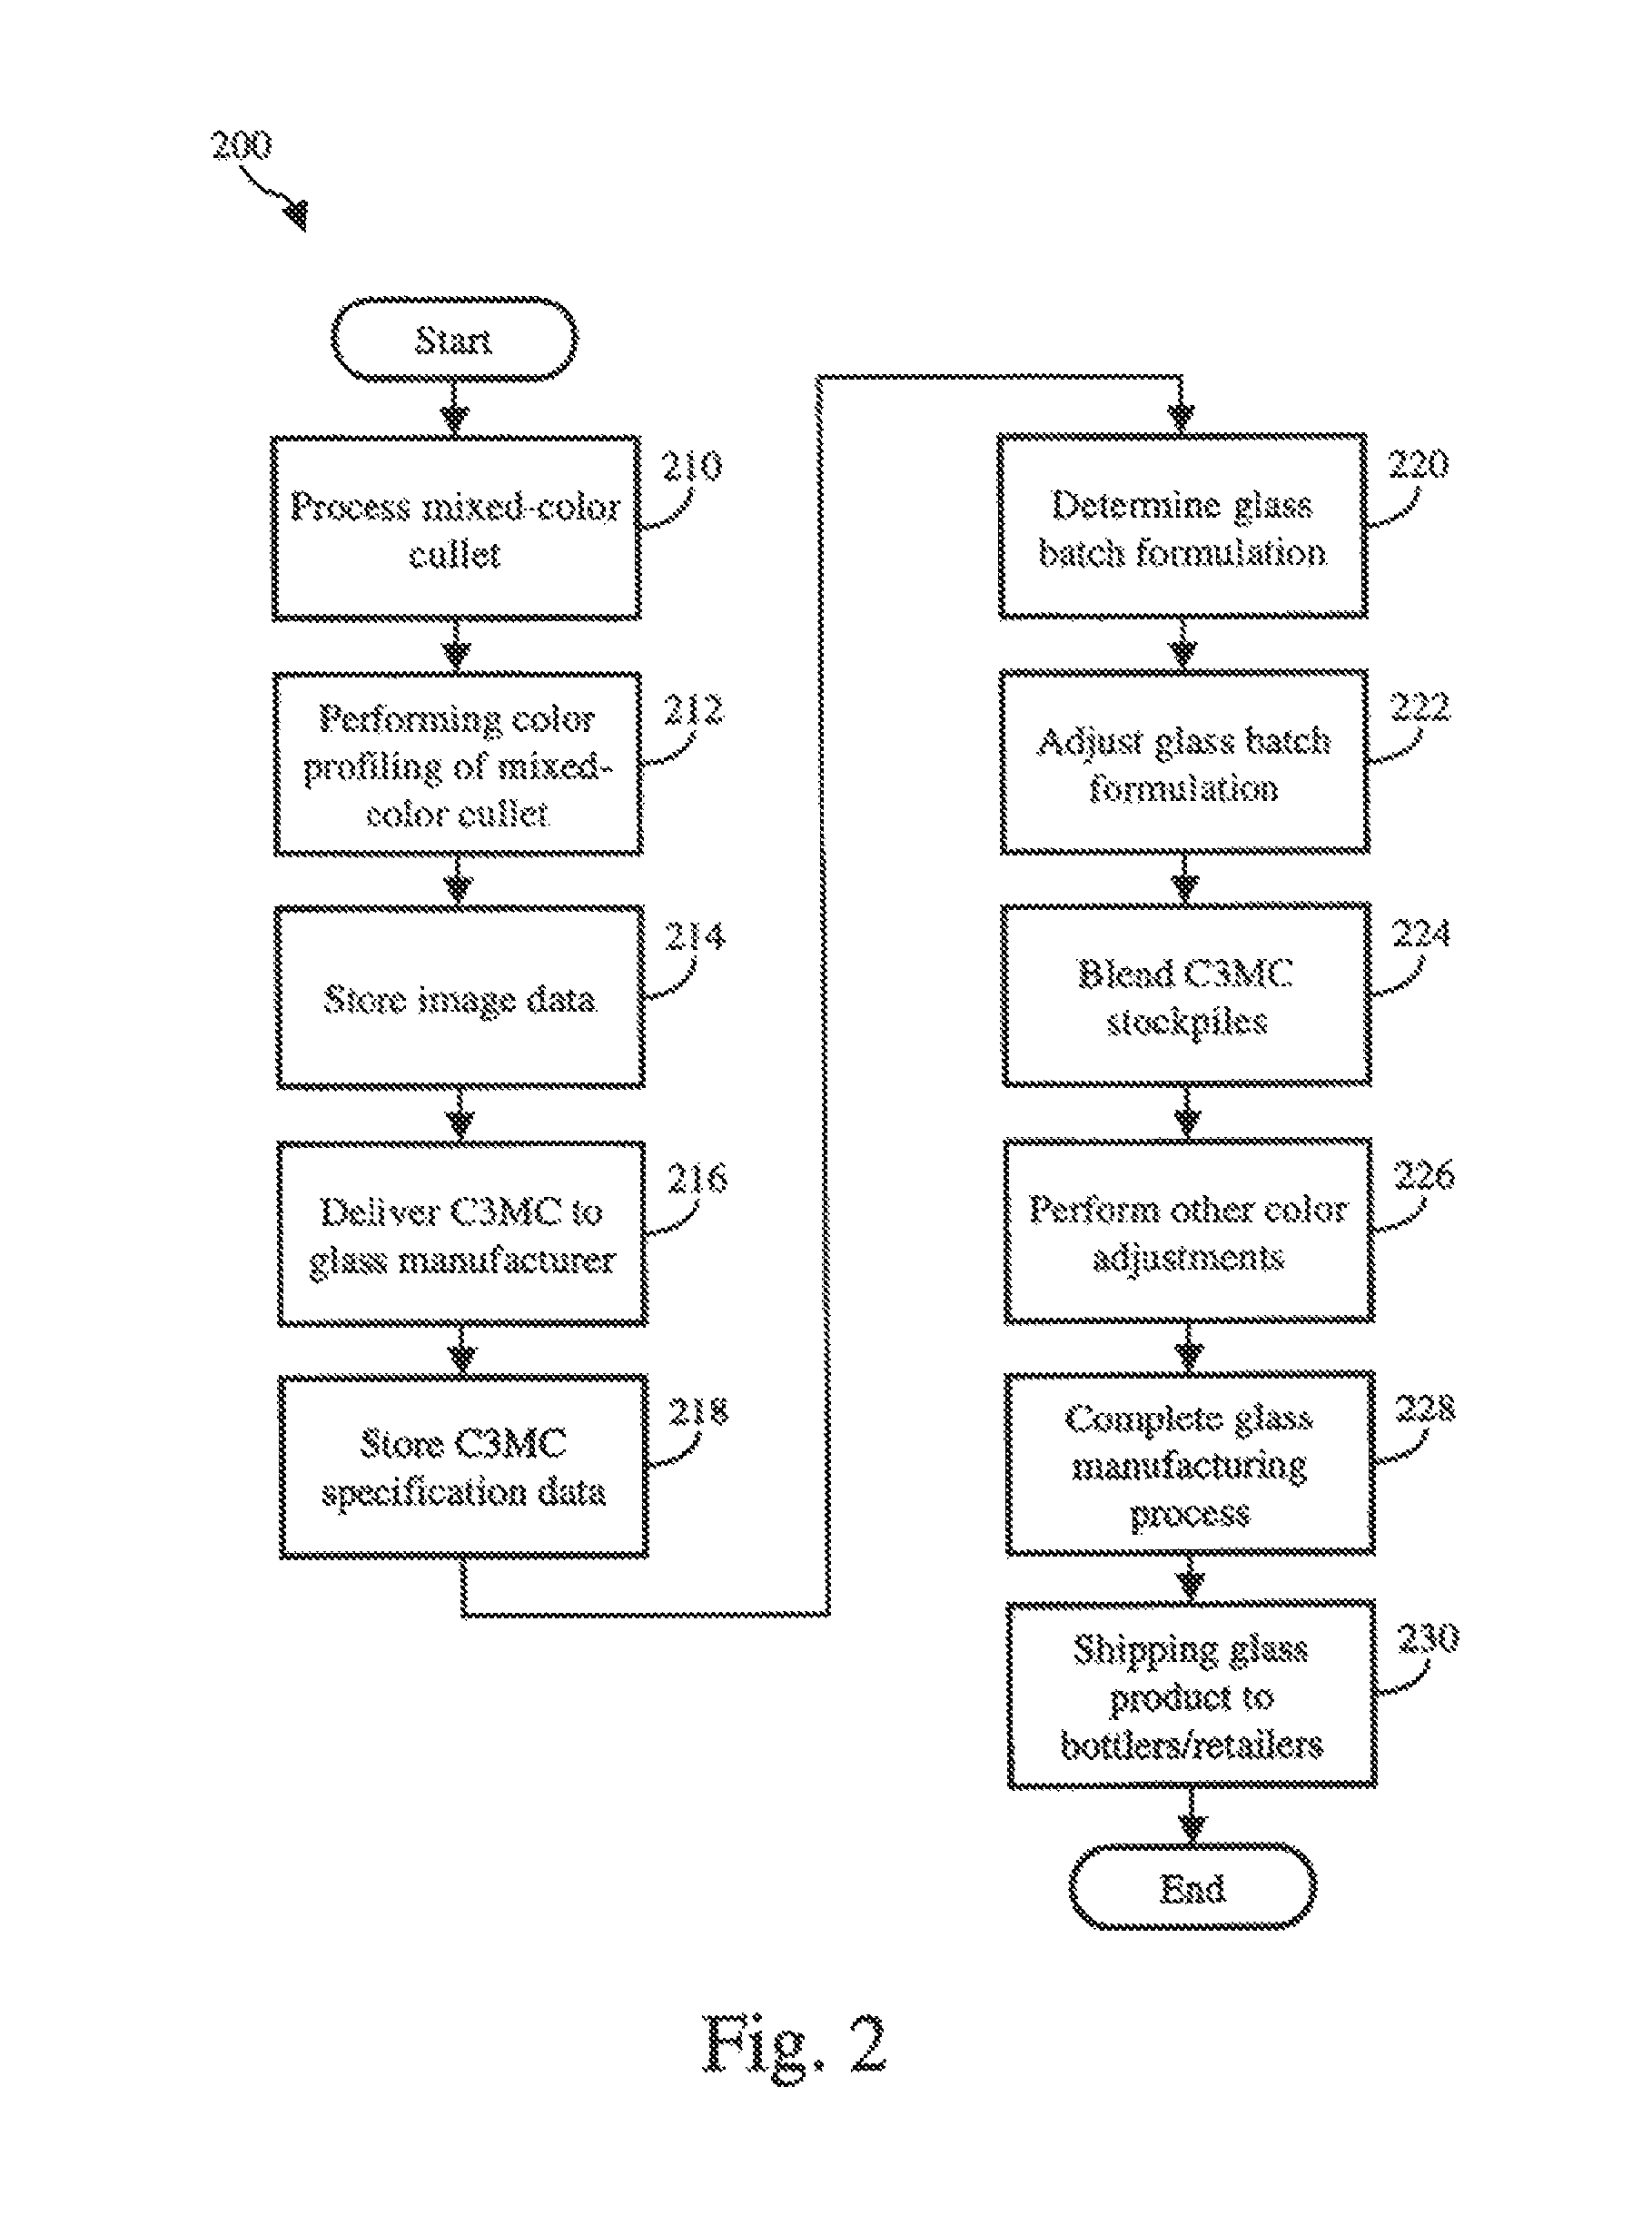 System for and method of mixed-color cullet characterization and certification, and providing contaminant-free, uniformly colored mixed-color cullet